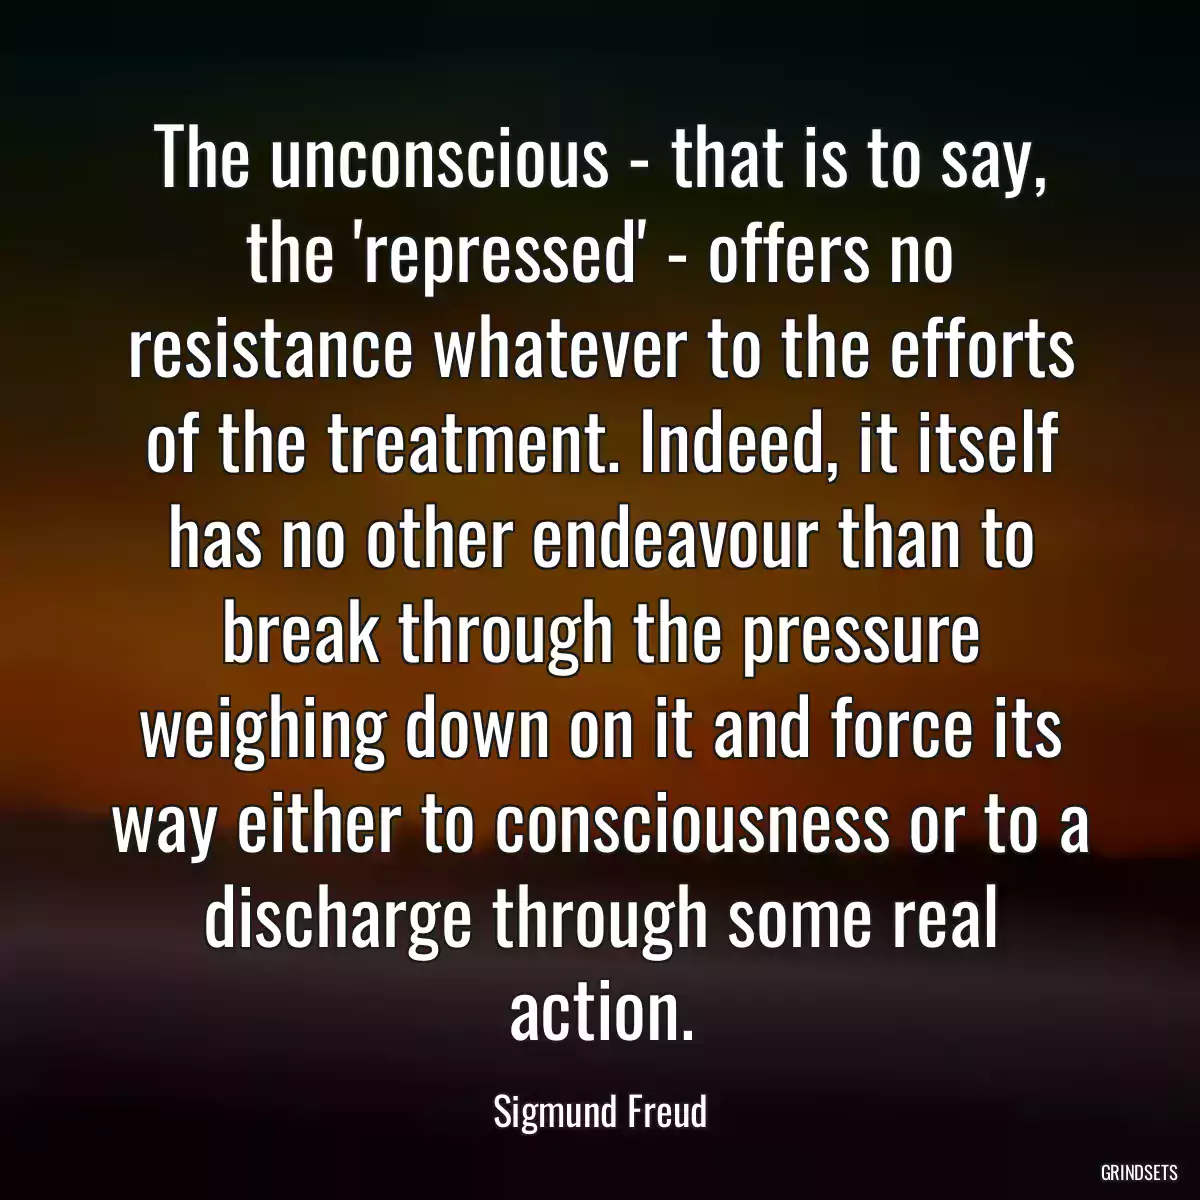 The unconscious - that is to say, the \'repressed\' - offers no resistance whatever to the efforts of the treatment. Indeed, it itself has no other endeavour than to break through the pressure weighing down on it and force its way either to consciousness or to a discharge through some real action.